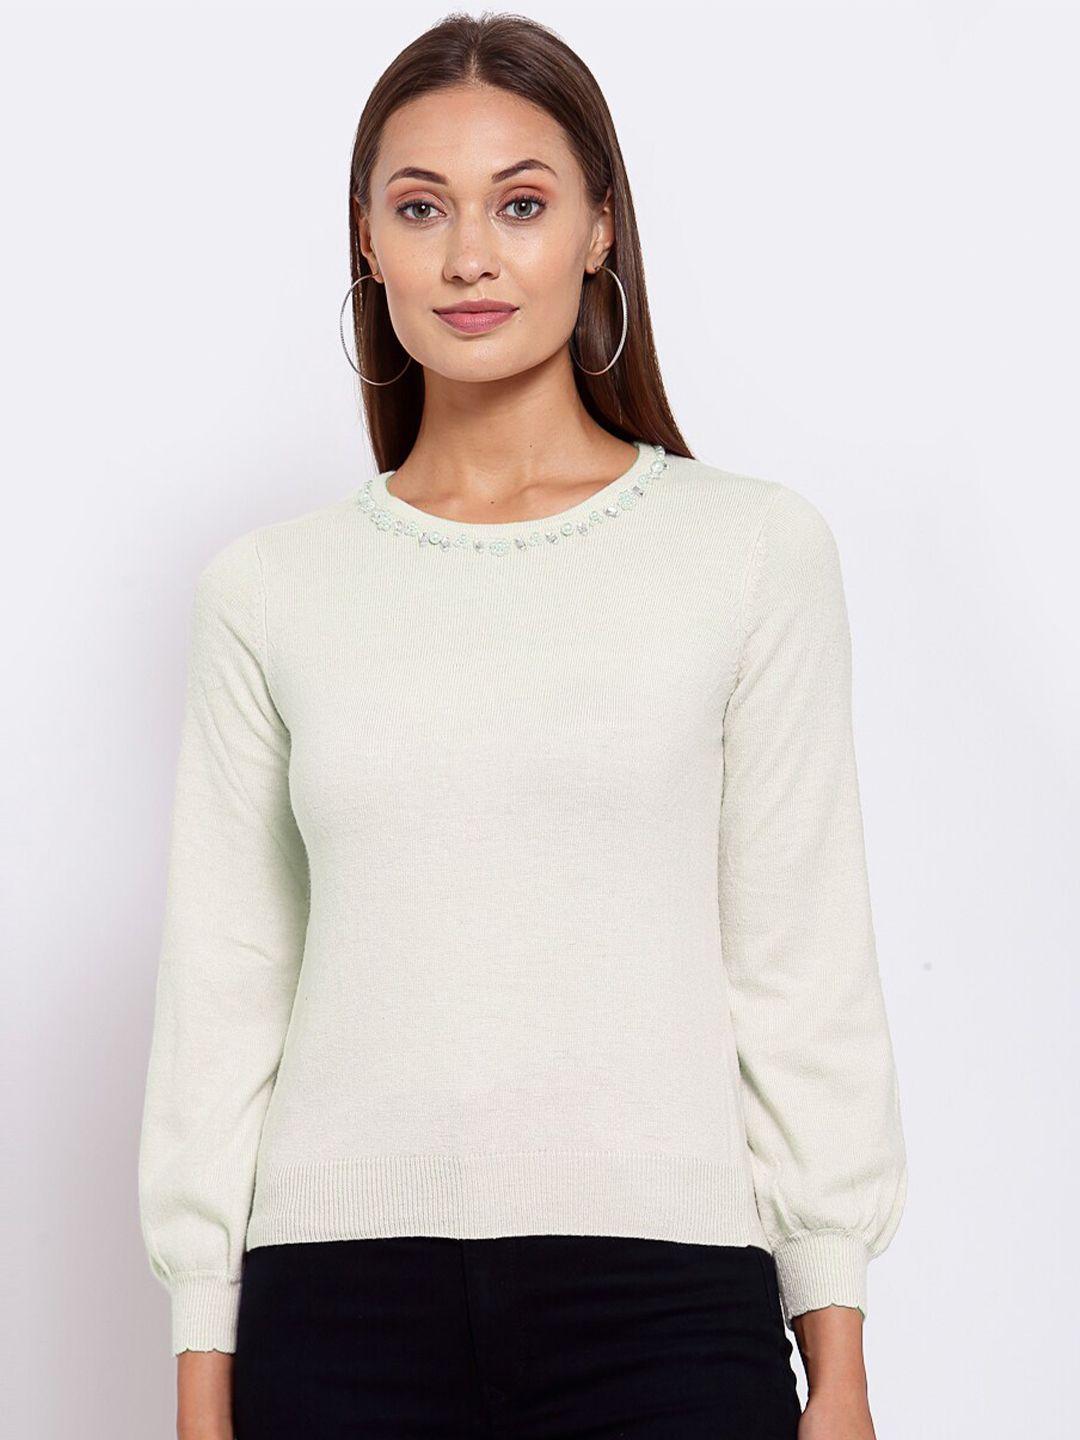 klotthe women off white woollen pullover with embellished detail